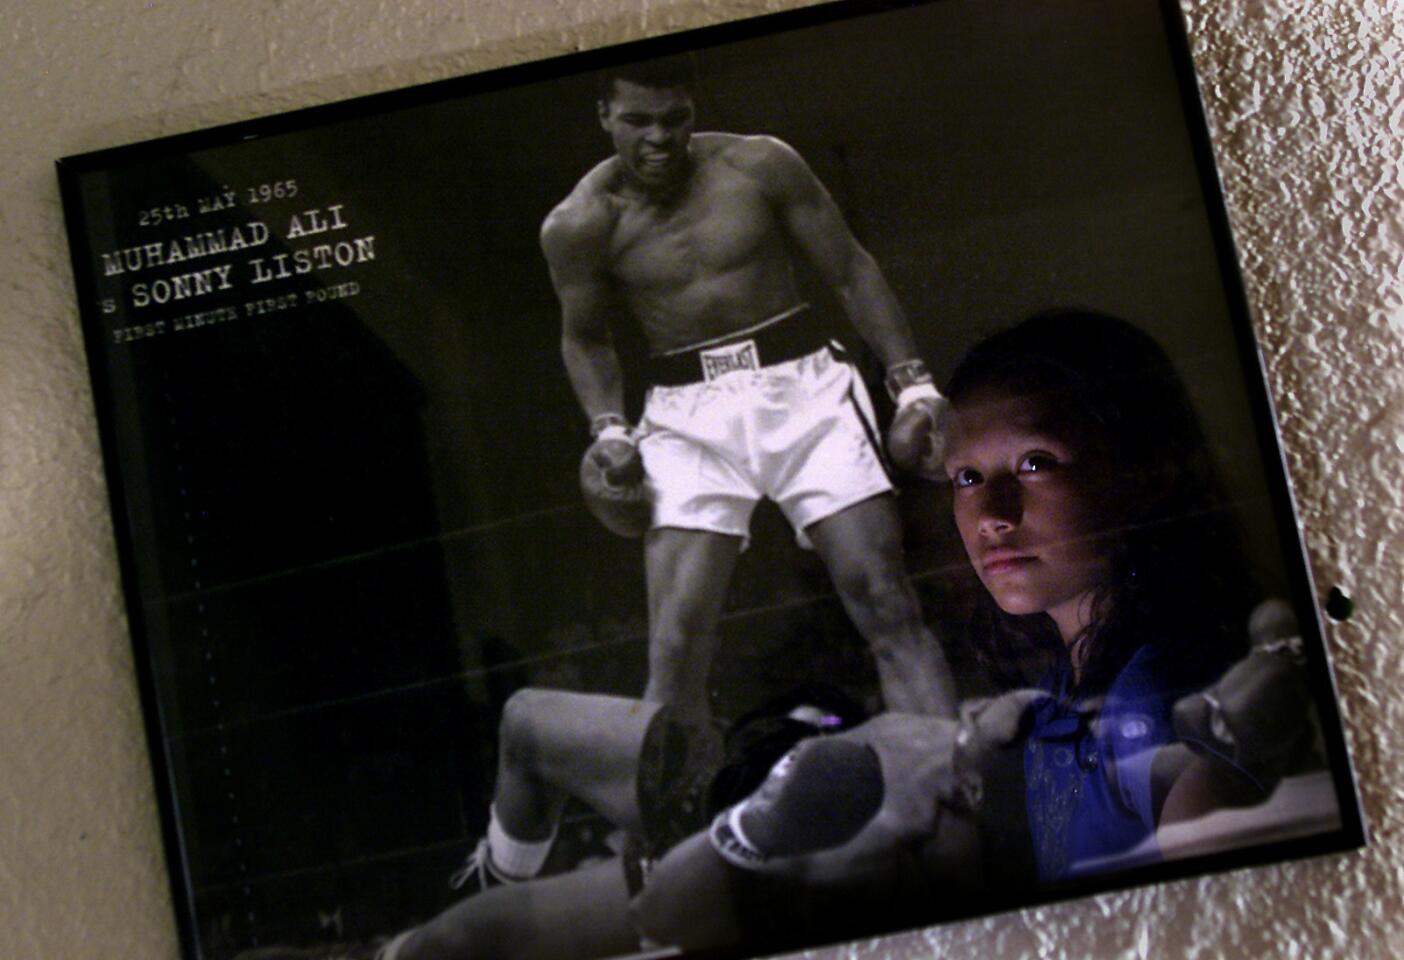 Cusack, Anne -- - In a portrait at her home Seneisa Estrada age 10 looks at the one framed poster in her living room that shows one of her idols and shows one of the few items in her home that reflects her interest in boxing as her mother is not fond of the idea that she boxes. Seneisa Estrada does her homework after school. Then heads for the Hollenbeck youth Center for training with her friend Frankie Gomez age 10. The two hope to compete in the upcoming Silver Gloves tournament in Long Beach. This will be one of their last days of training at the youth center as they plan to move to a new gym. 10/03/2002 Anne cusack/Los Angeles Times